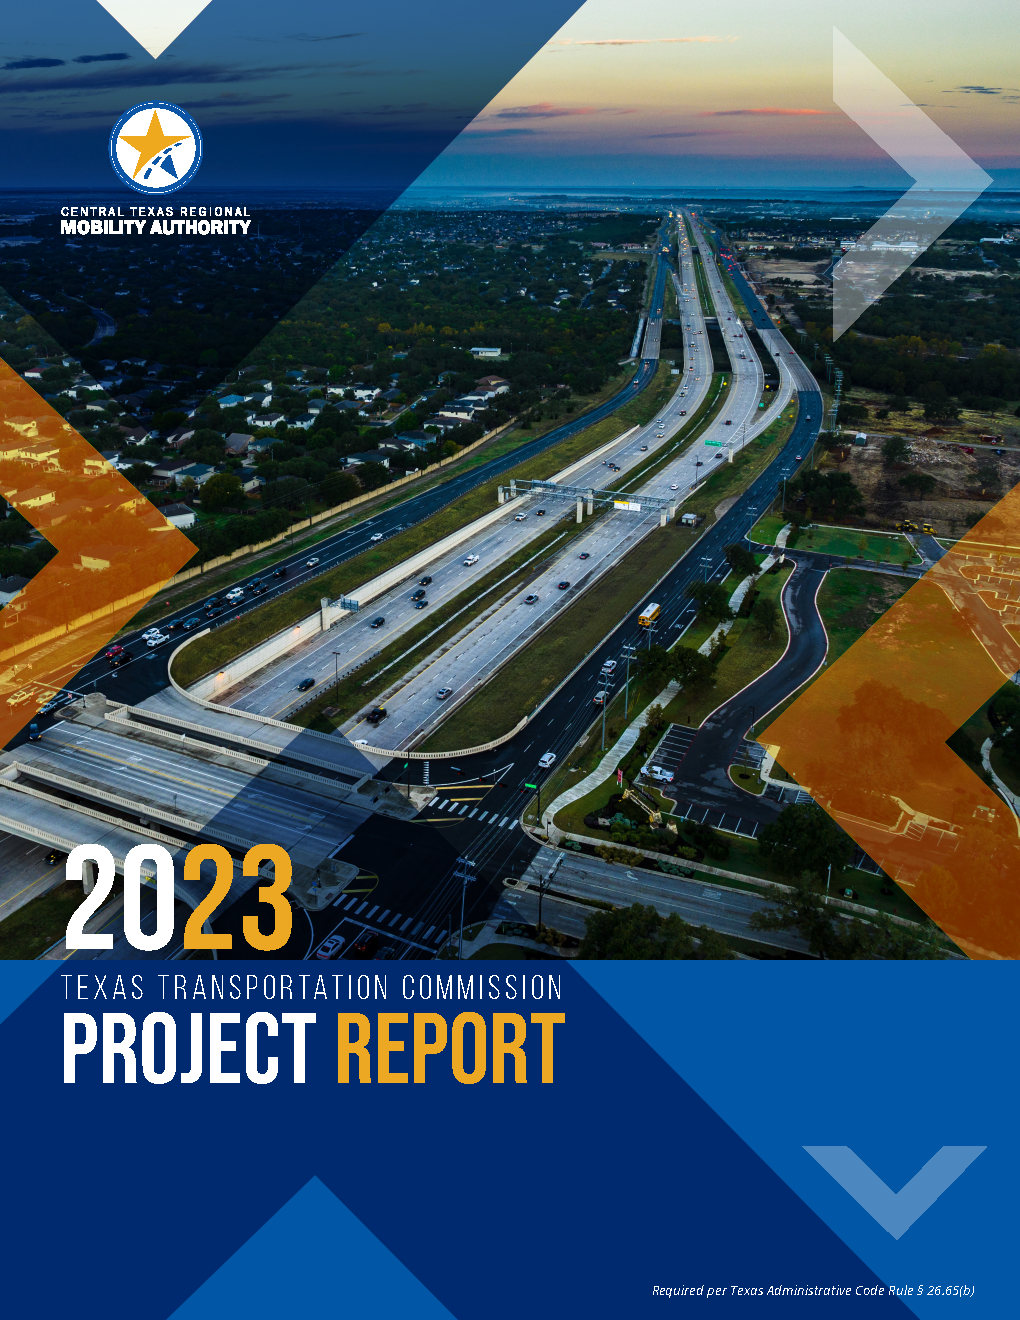 2023 Project Report to Texas Transportation Commission